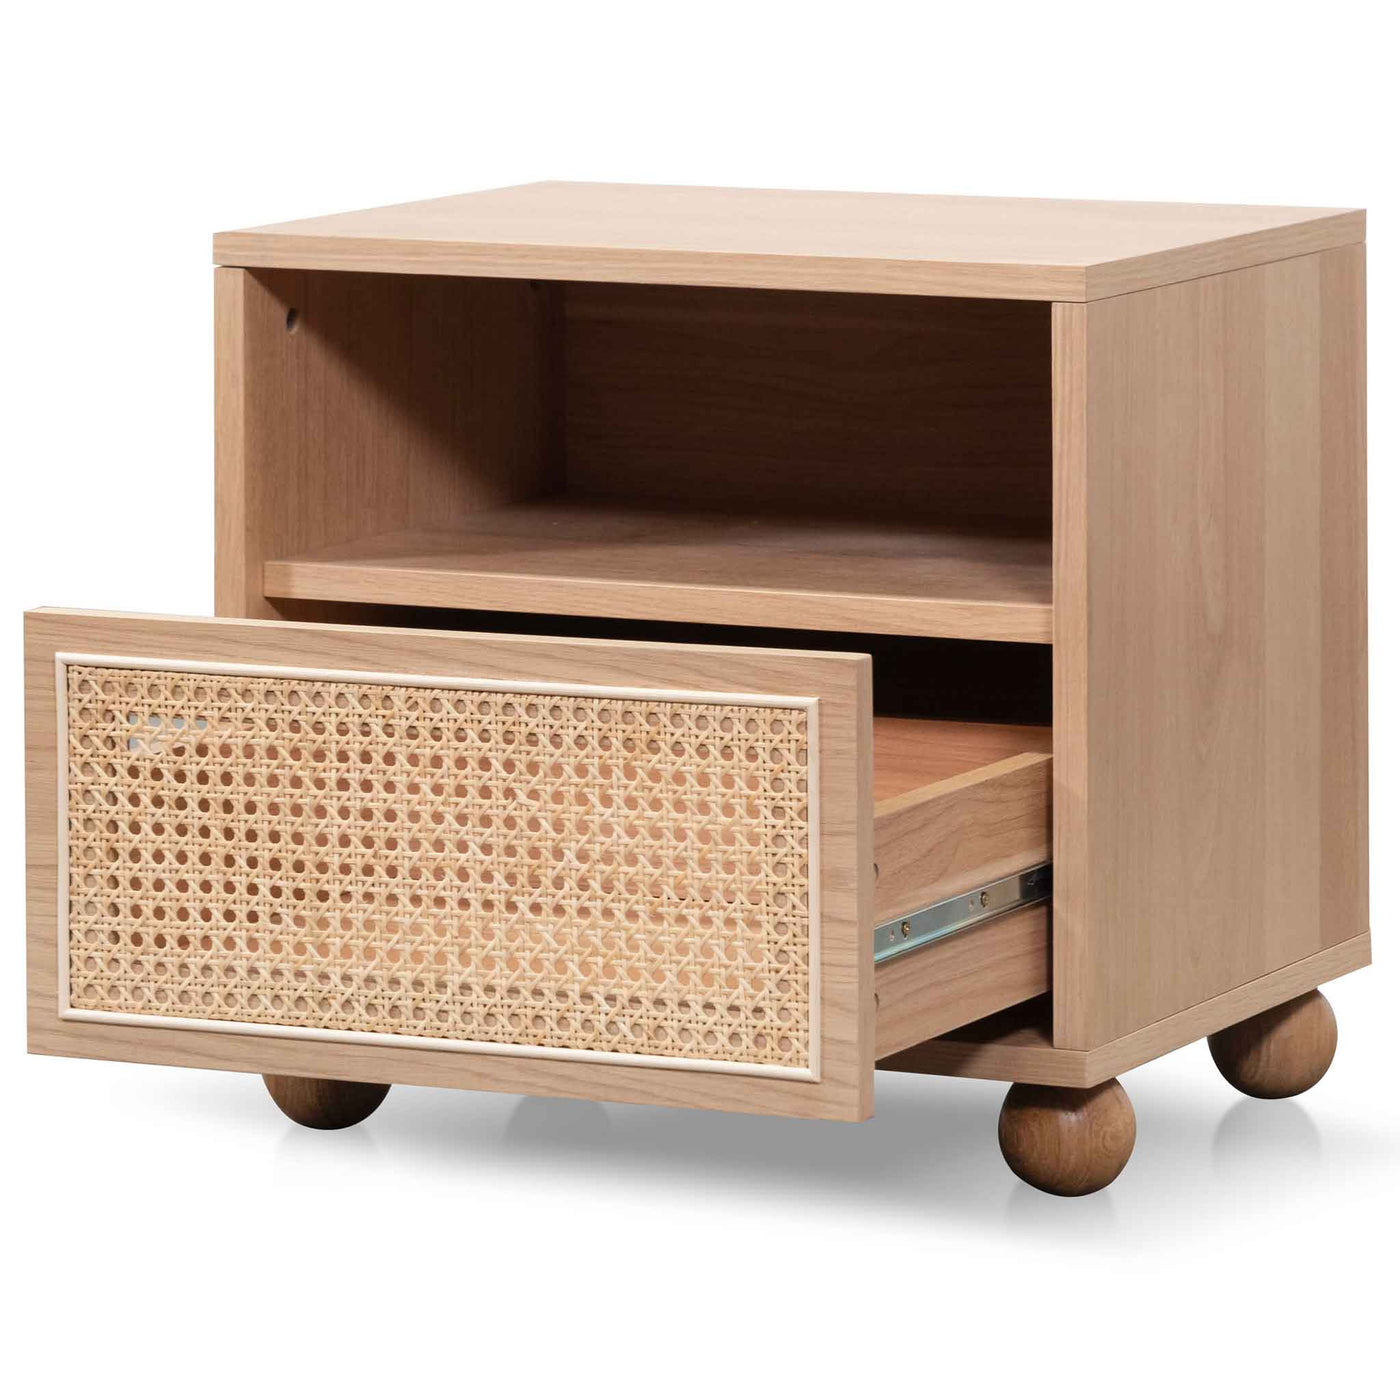 Wooden Side Table with Rattan Front - Natural